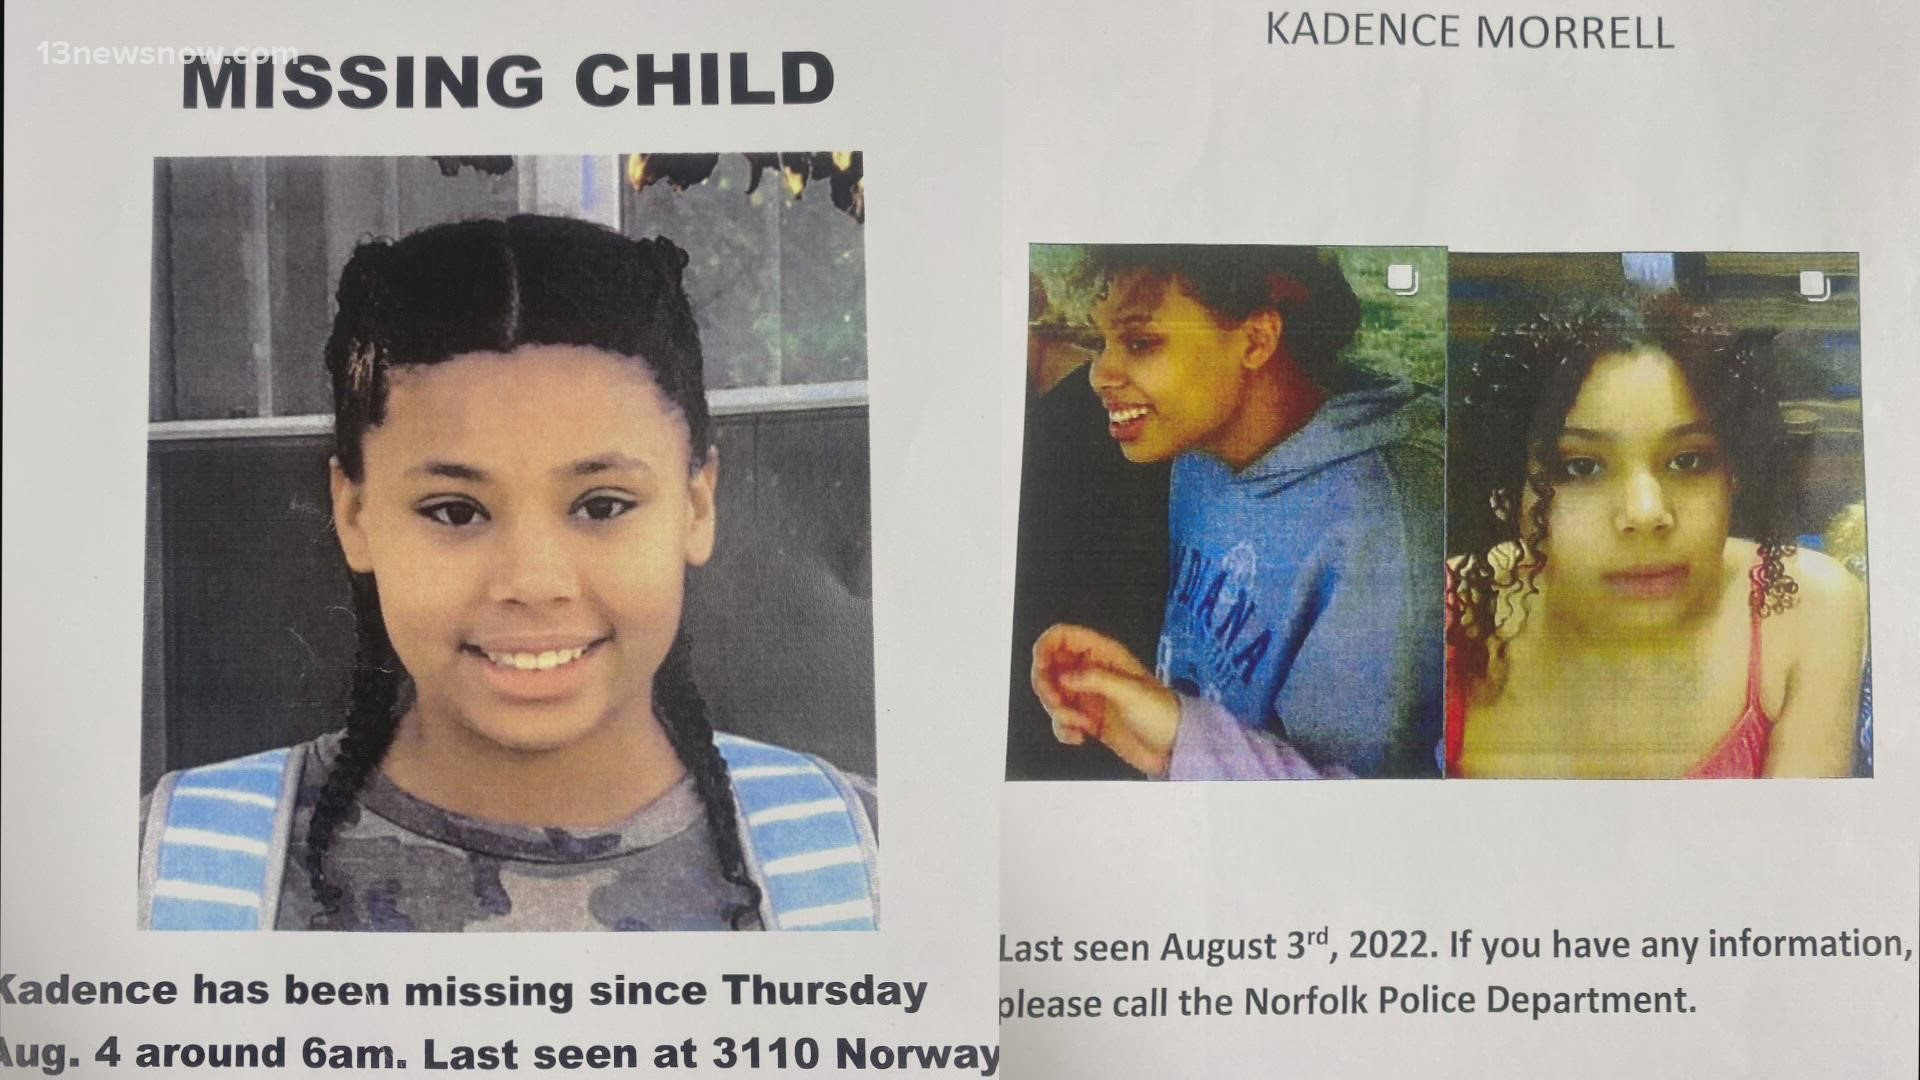 While the Norfolk Police Dept. is leading the investigation, an FBI Norfolk spokesperson confirmed they are helping in the search for Kadence Morrel.